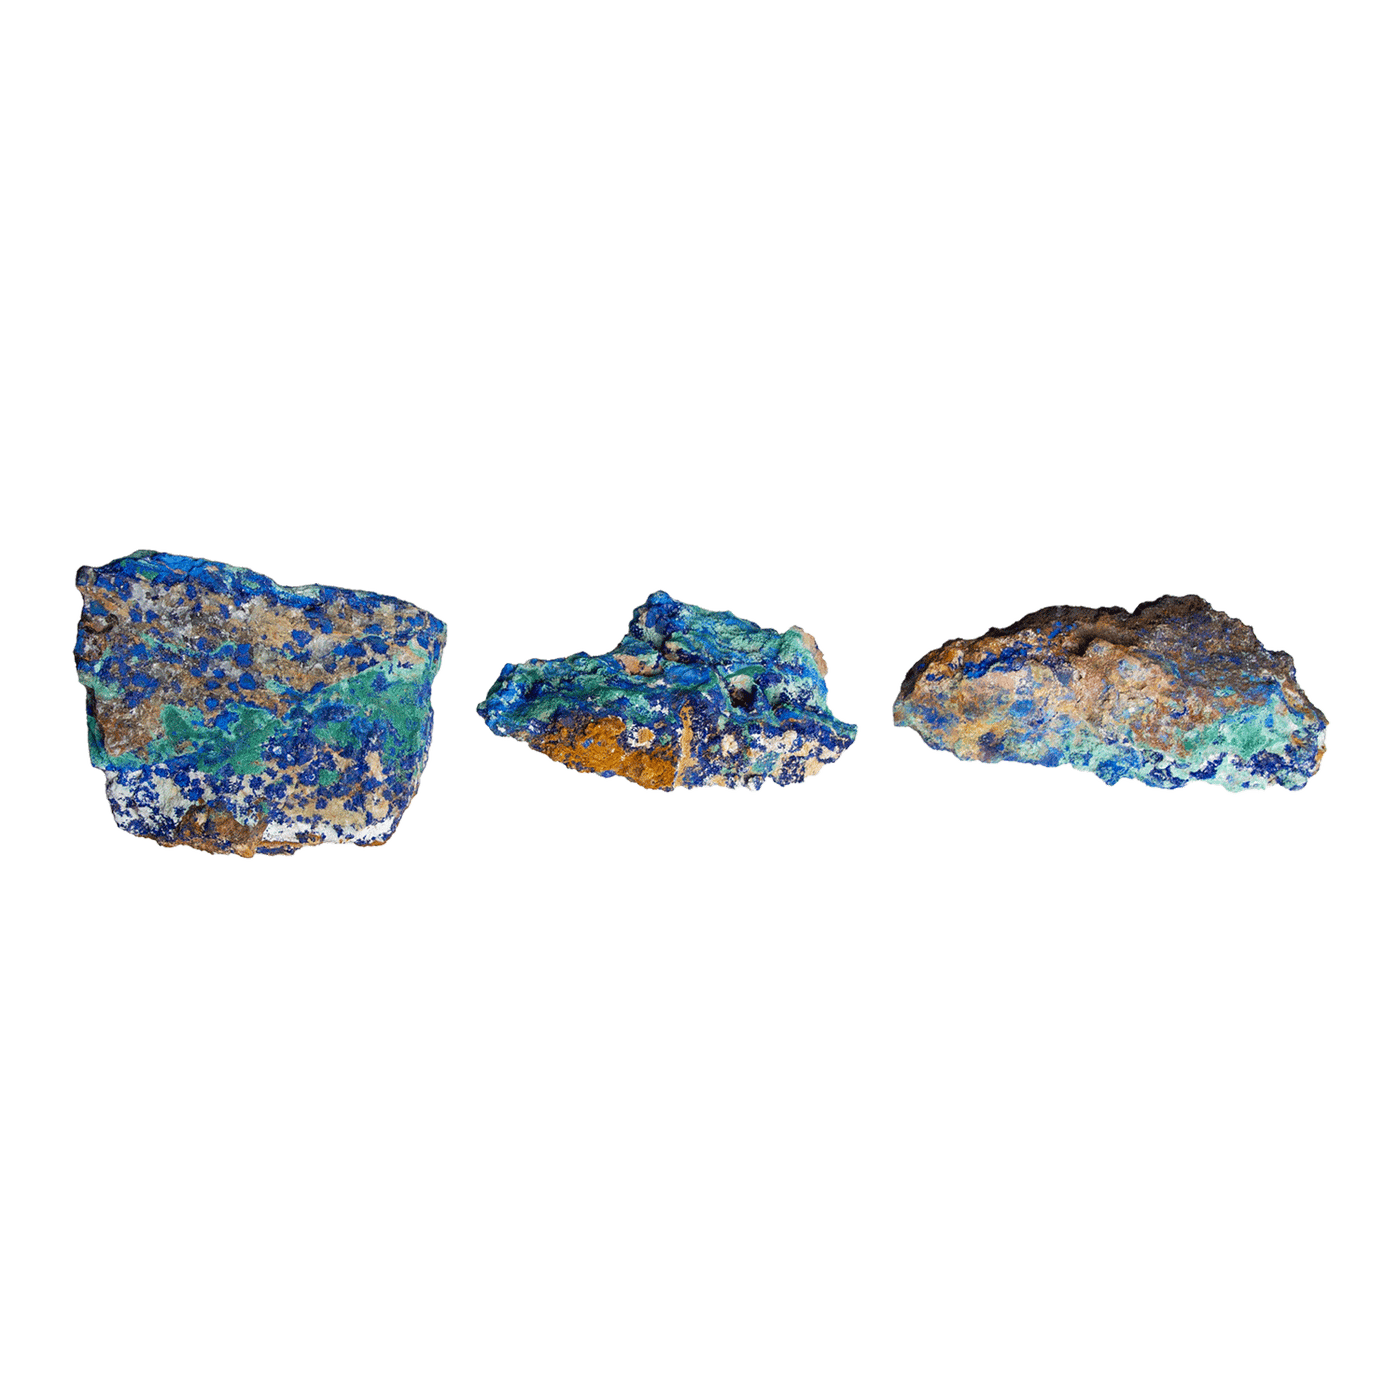 3 genuine raw Azurite crystals to show variation in size, pattern, and coloration by Energy Muse